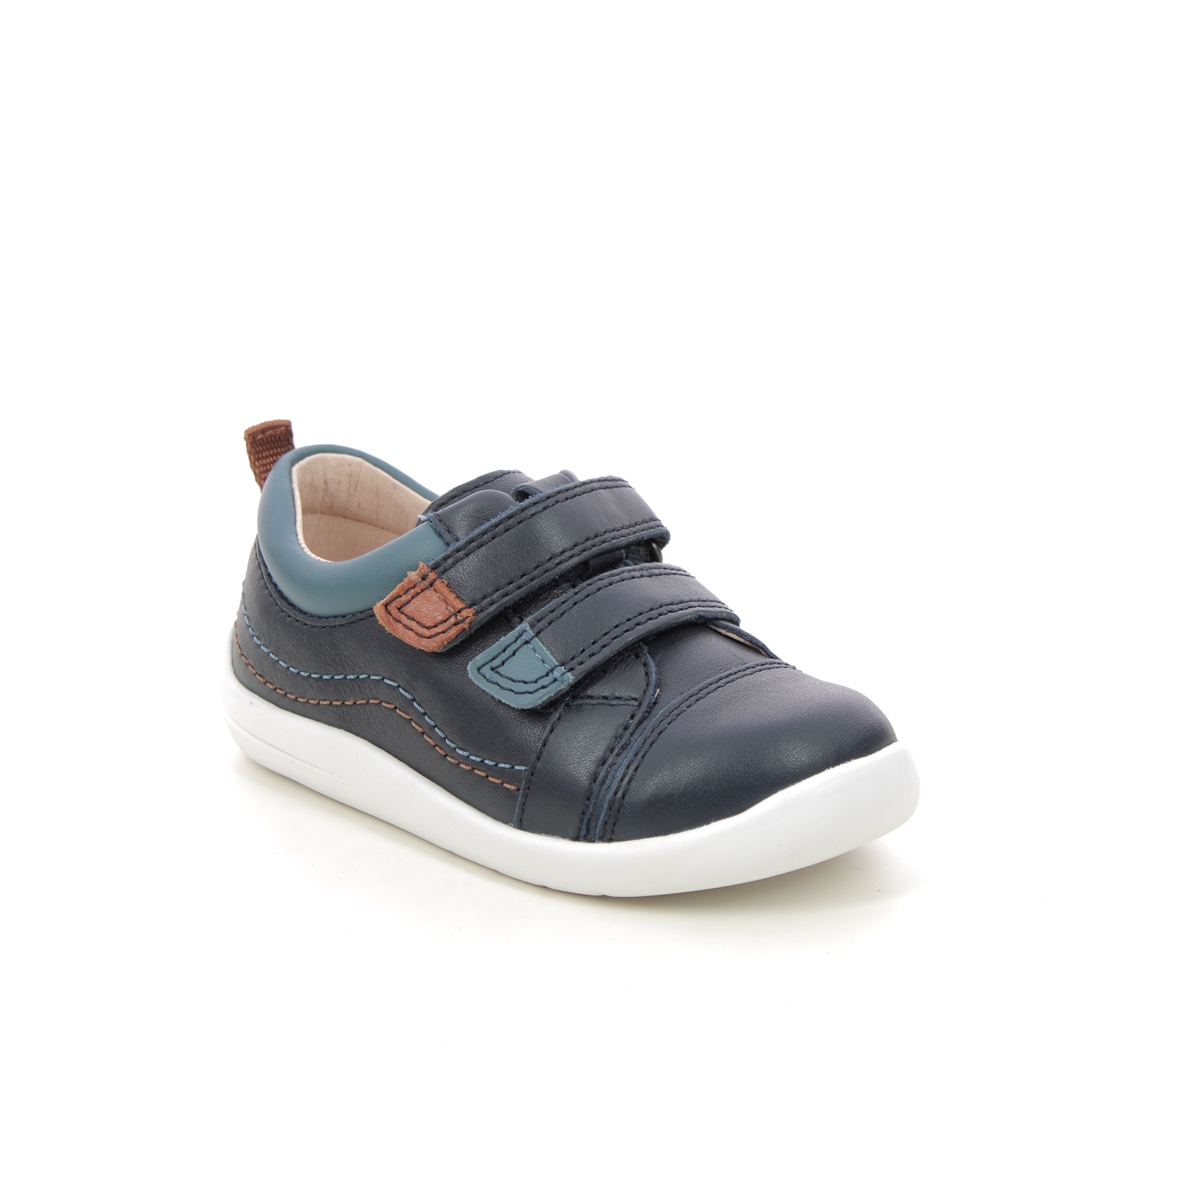 Start Rite - Clubhouse Jojo In Navy Leather 0800-96F In Size 5 In Plain Navy Leather Boys First And Toddler Shoes  In Navy Leather For kids